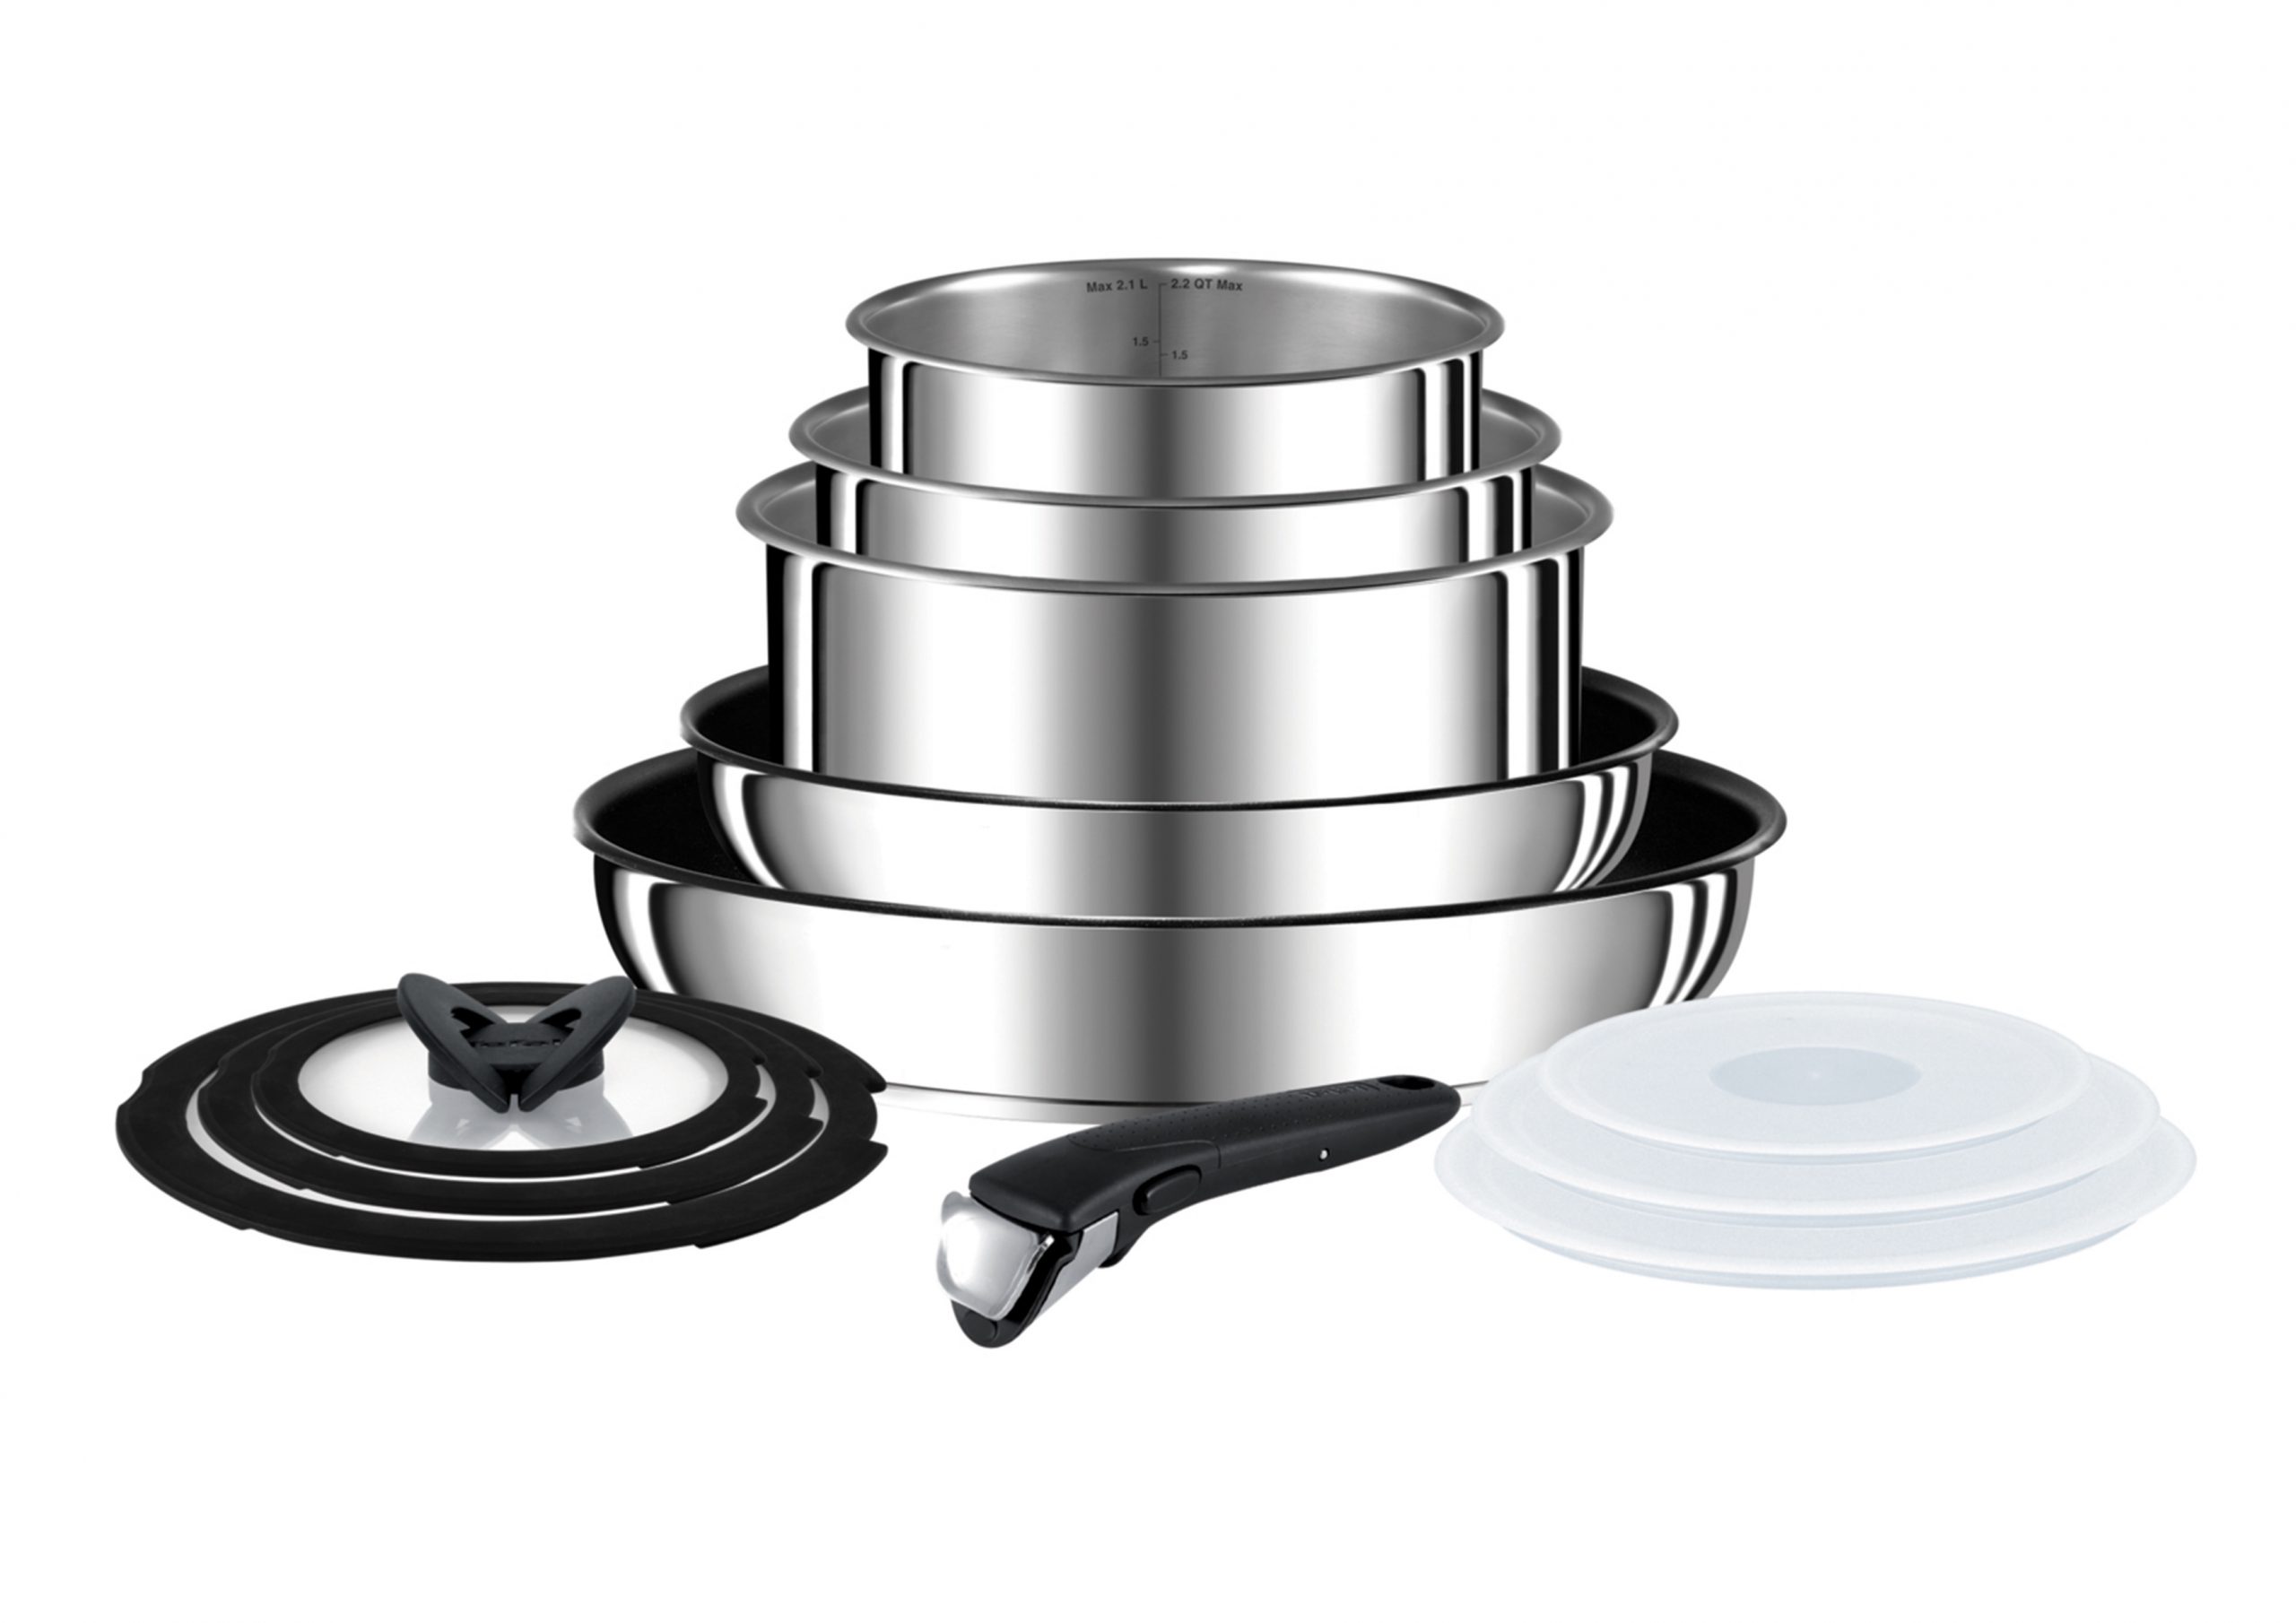 https://sgp1.digitaloceanspaces.com/cdn.yournet.space/wp-content/good-design.org/2020/09/10092738/Tefal-Ingenio-Preference-Stainless-Steel-13pc-Set-1-scaled.jpg